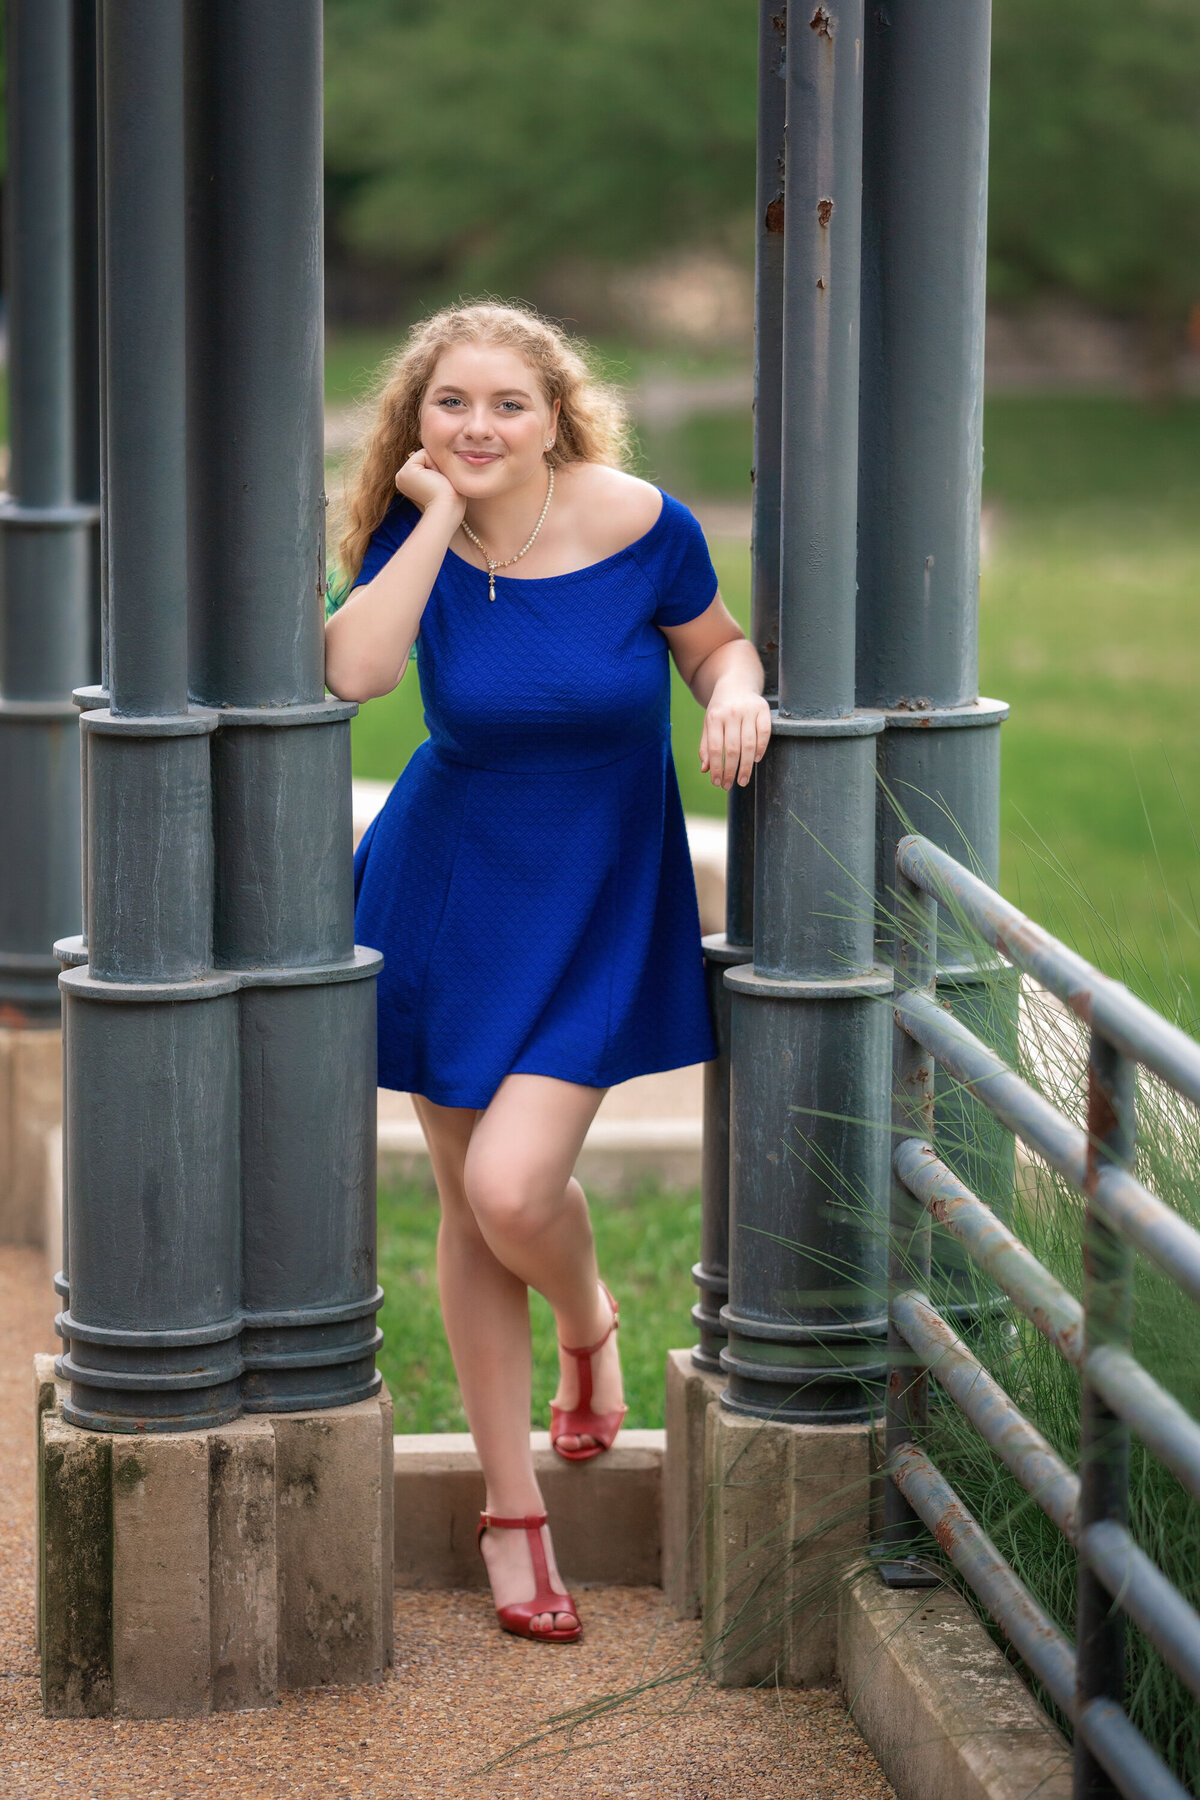 Girl in royal blue skater dress and red heels.  The girl is standing in between green metal poles on the Loyola campus.  She has one hand near her face and is resting her cheek on it.  She is smiling and looking at the camera.  She has long blonde curly hair.